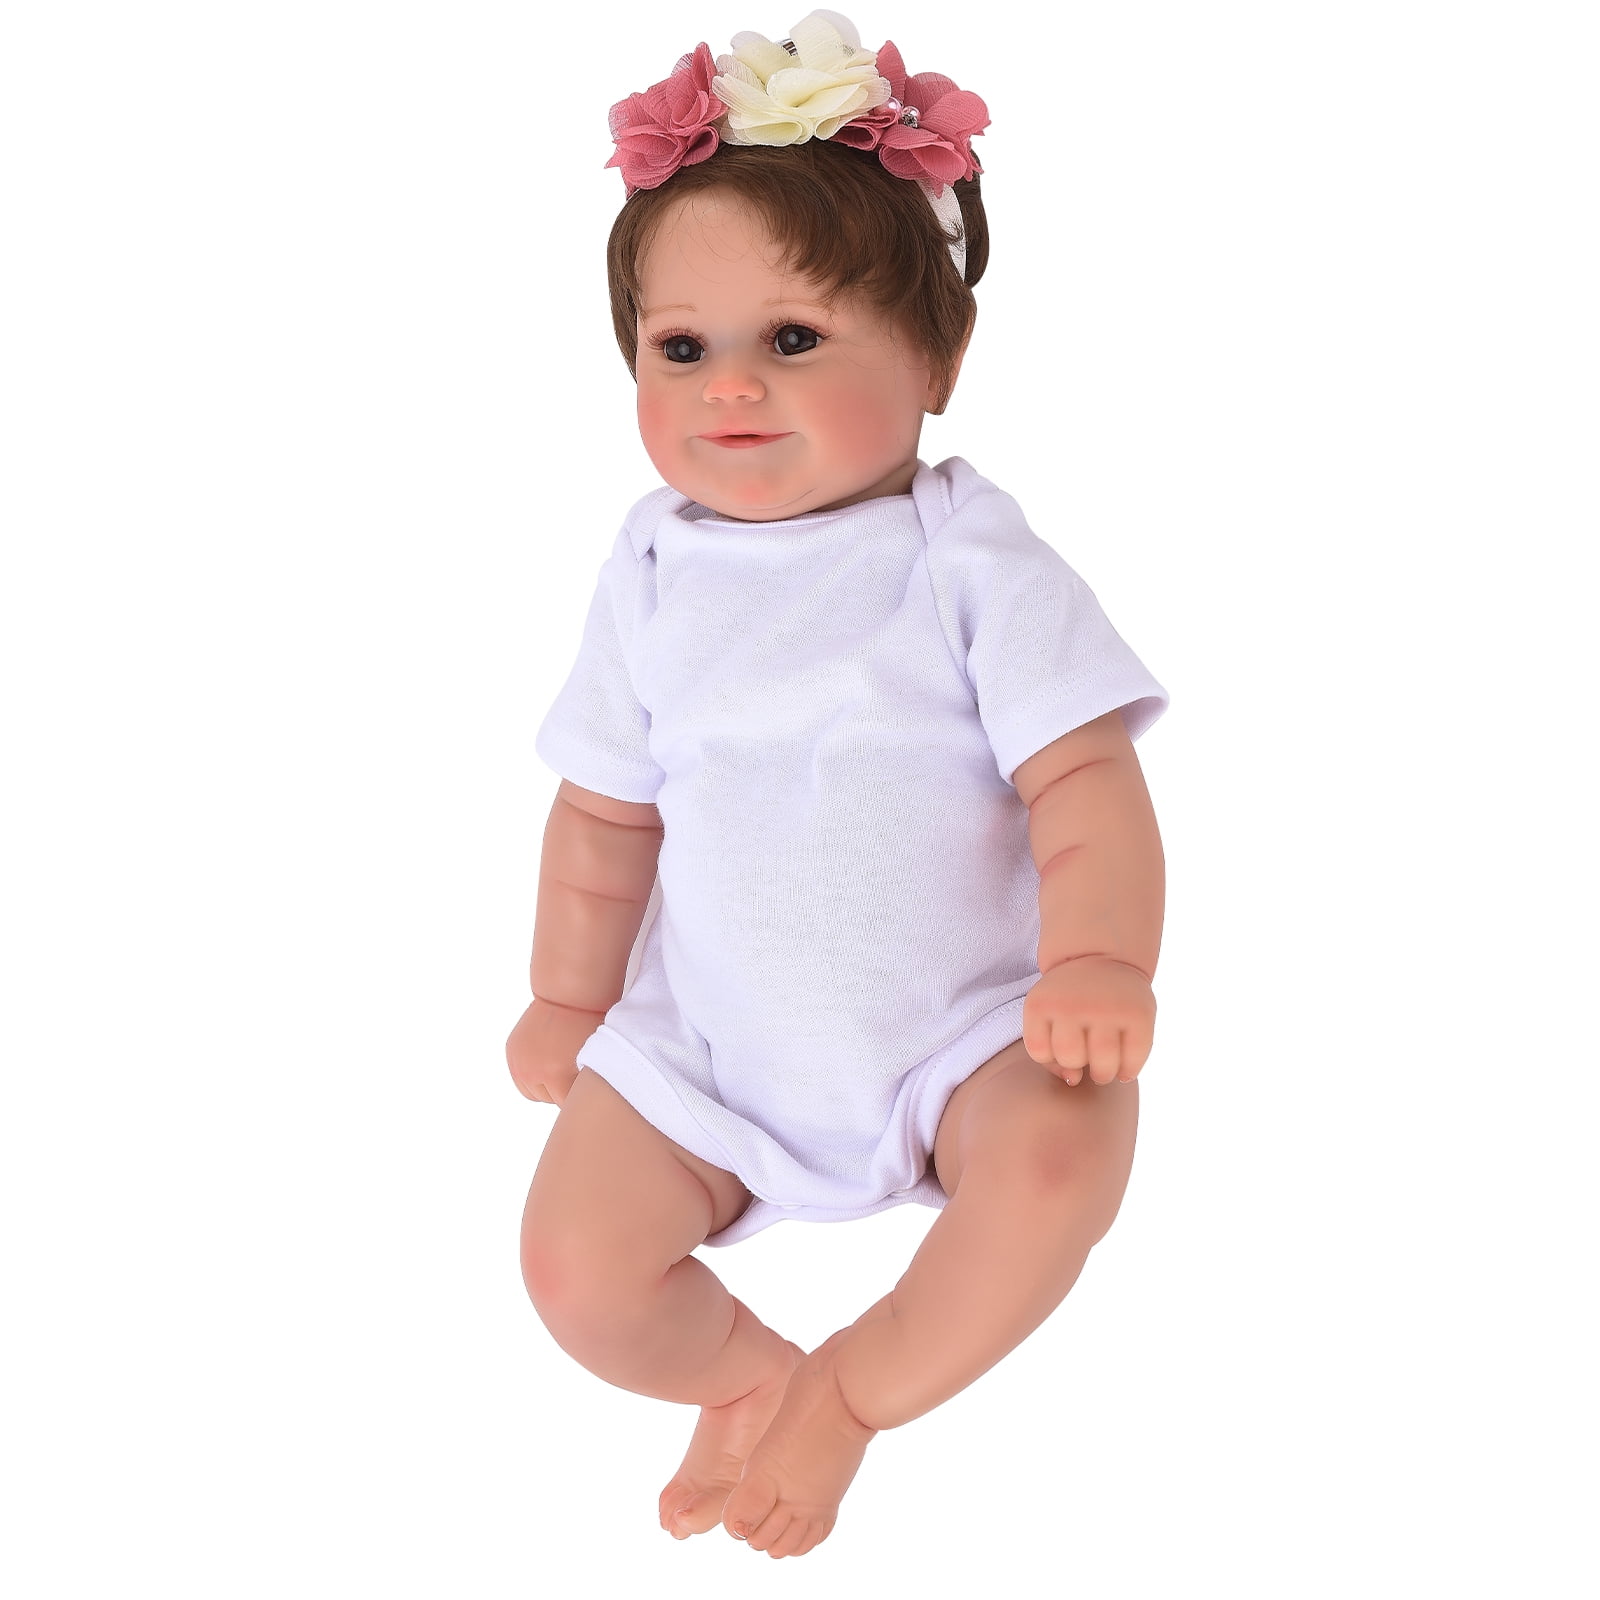 Npk 50cm Maddie Reborn Baby Full Body Silicone Girl Doll Toddler Princess  With Blonde Rooted Hair 100% Hand Painted Doll Christmas Gift Toys